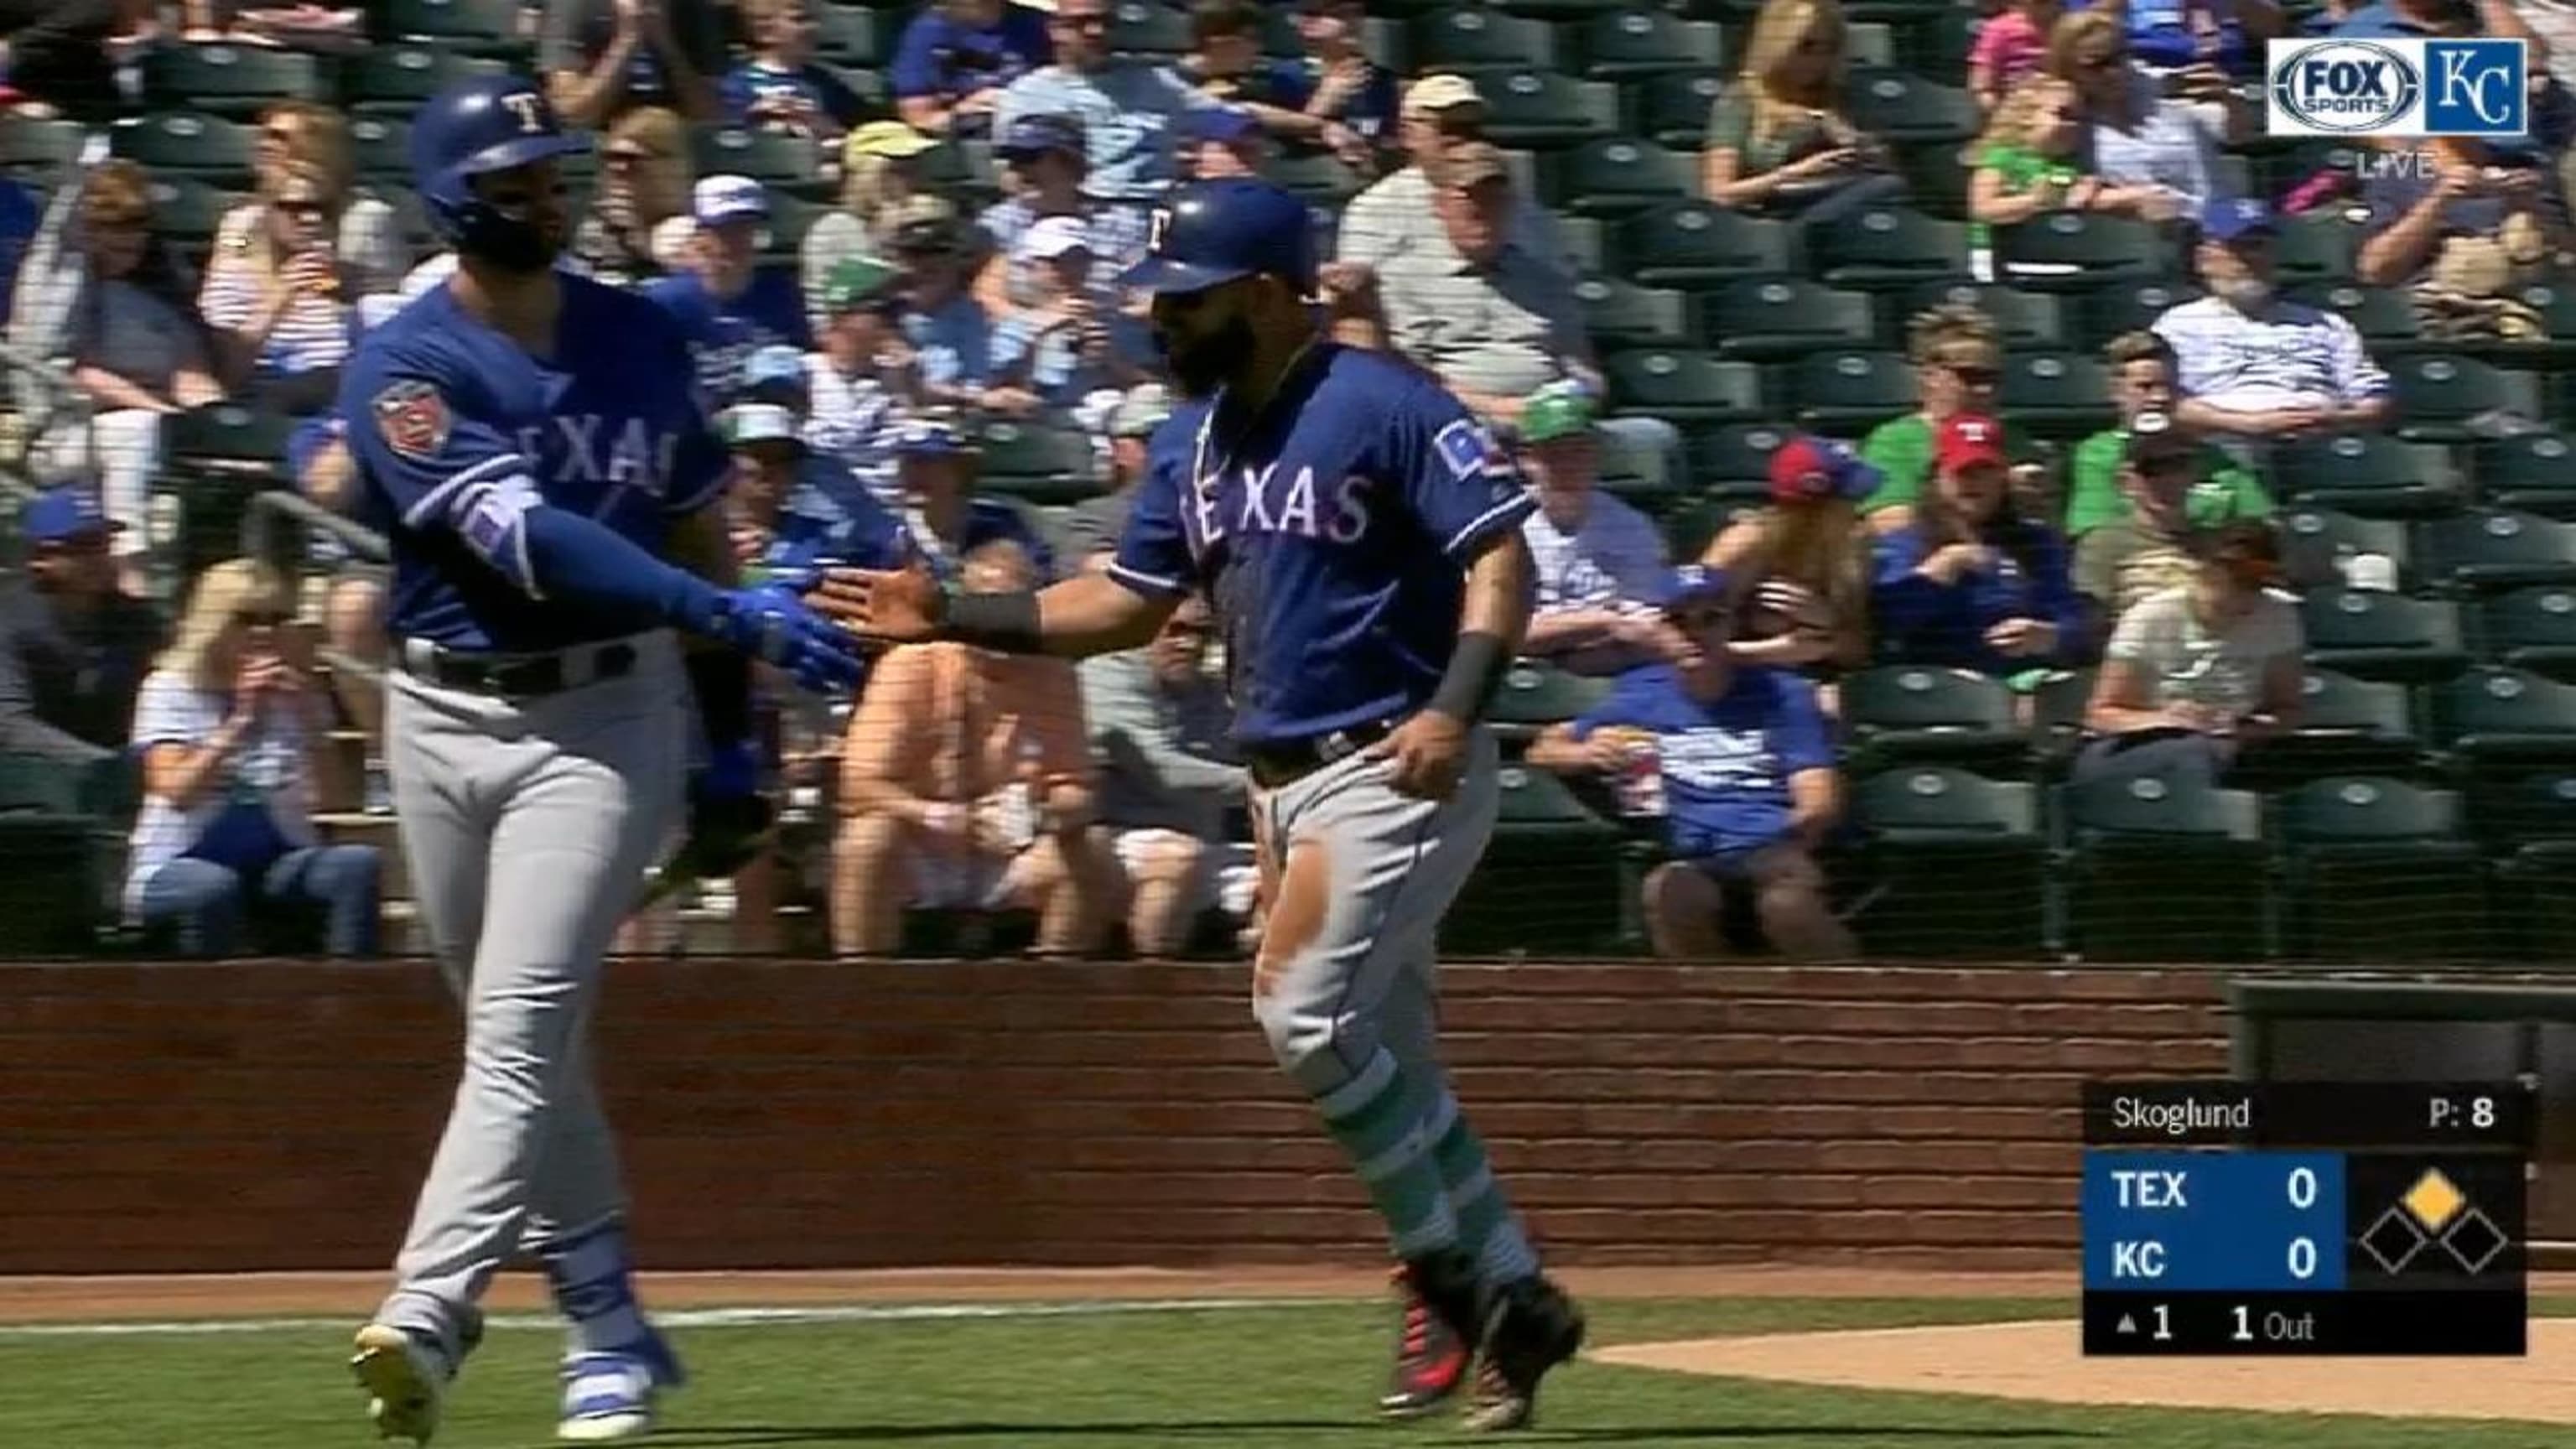 Rougned Odor shares infield with brother, also named Rougned Odor